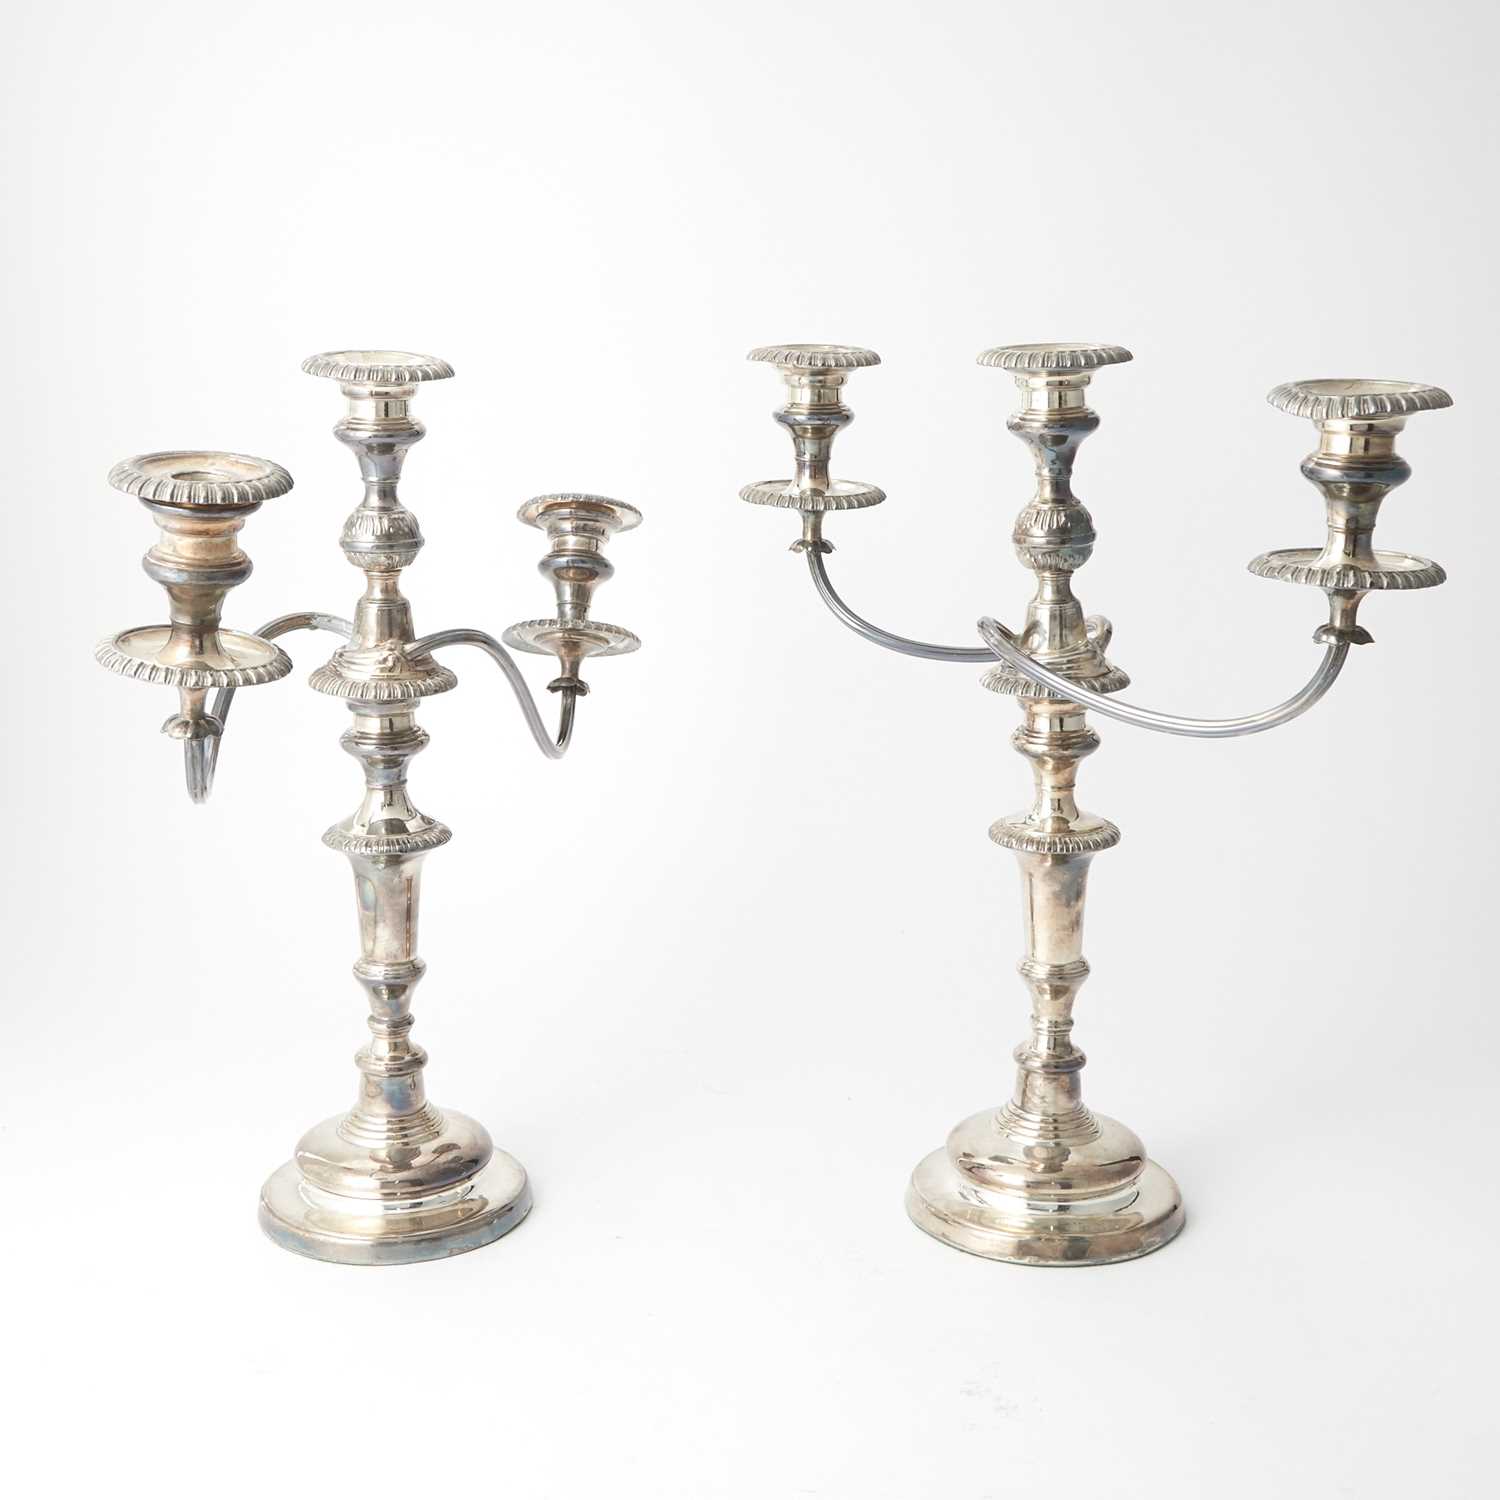 Lot 205 - Pair of Silver-Plated Three-Light Candelabra